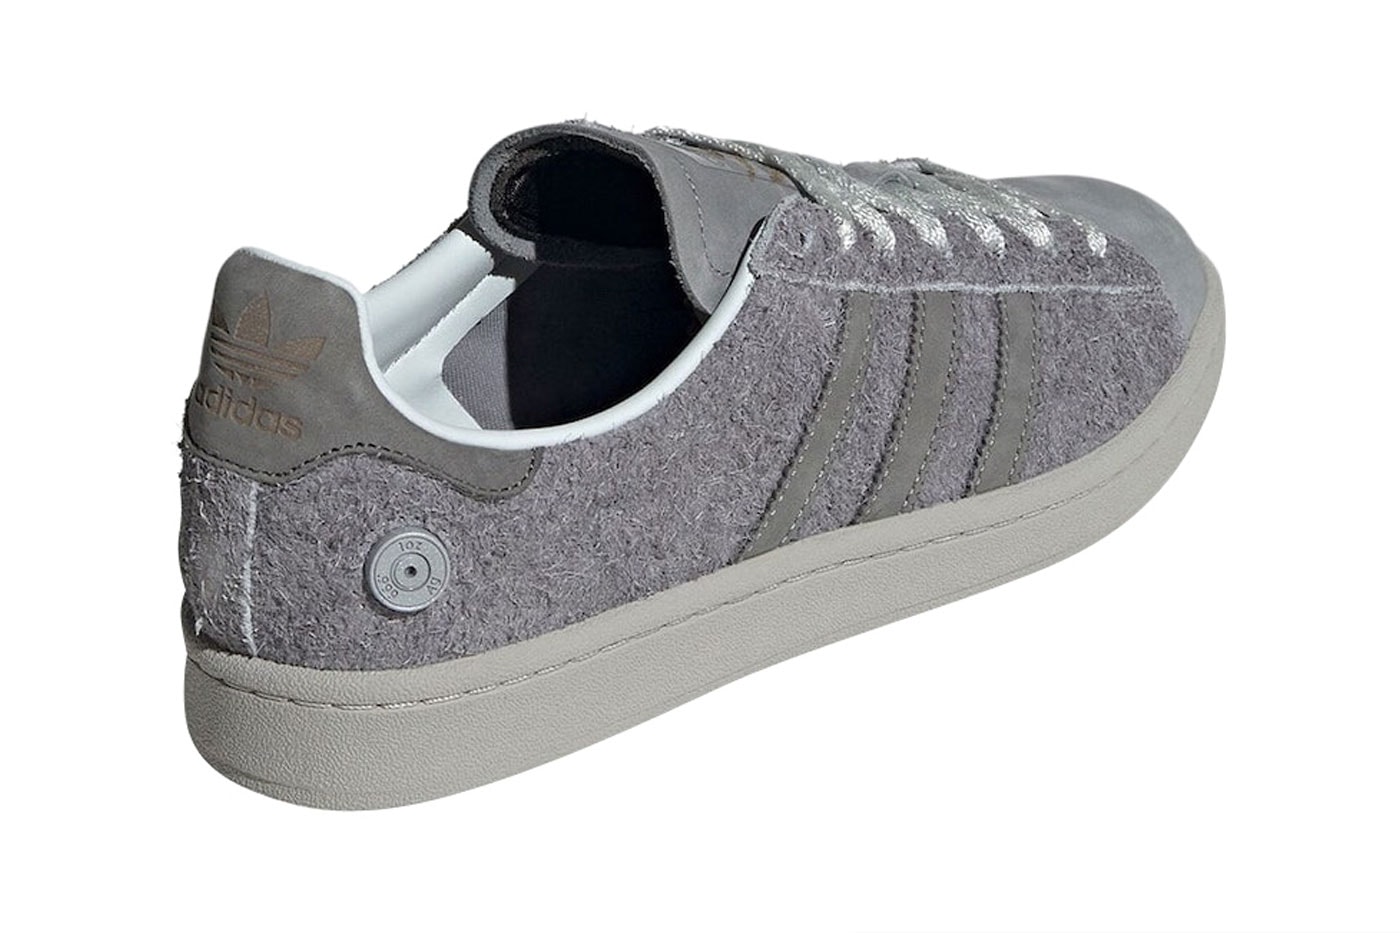 adidas Campus 80s How to Kill a Werewolf Release Date